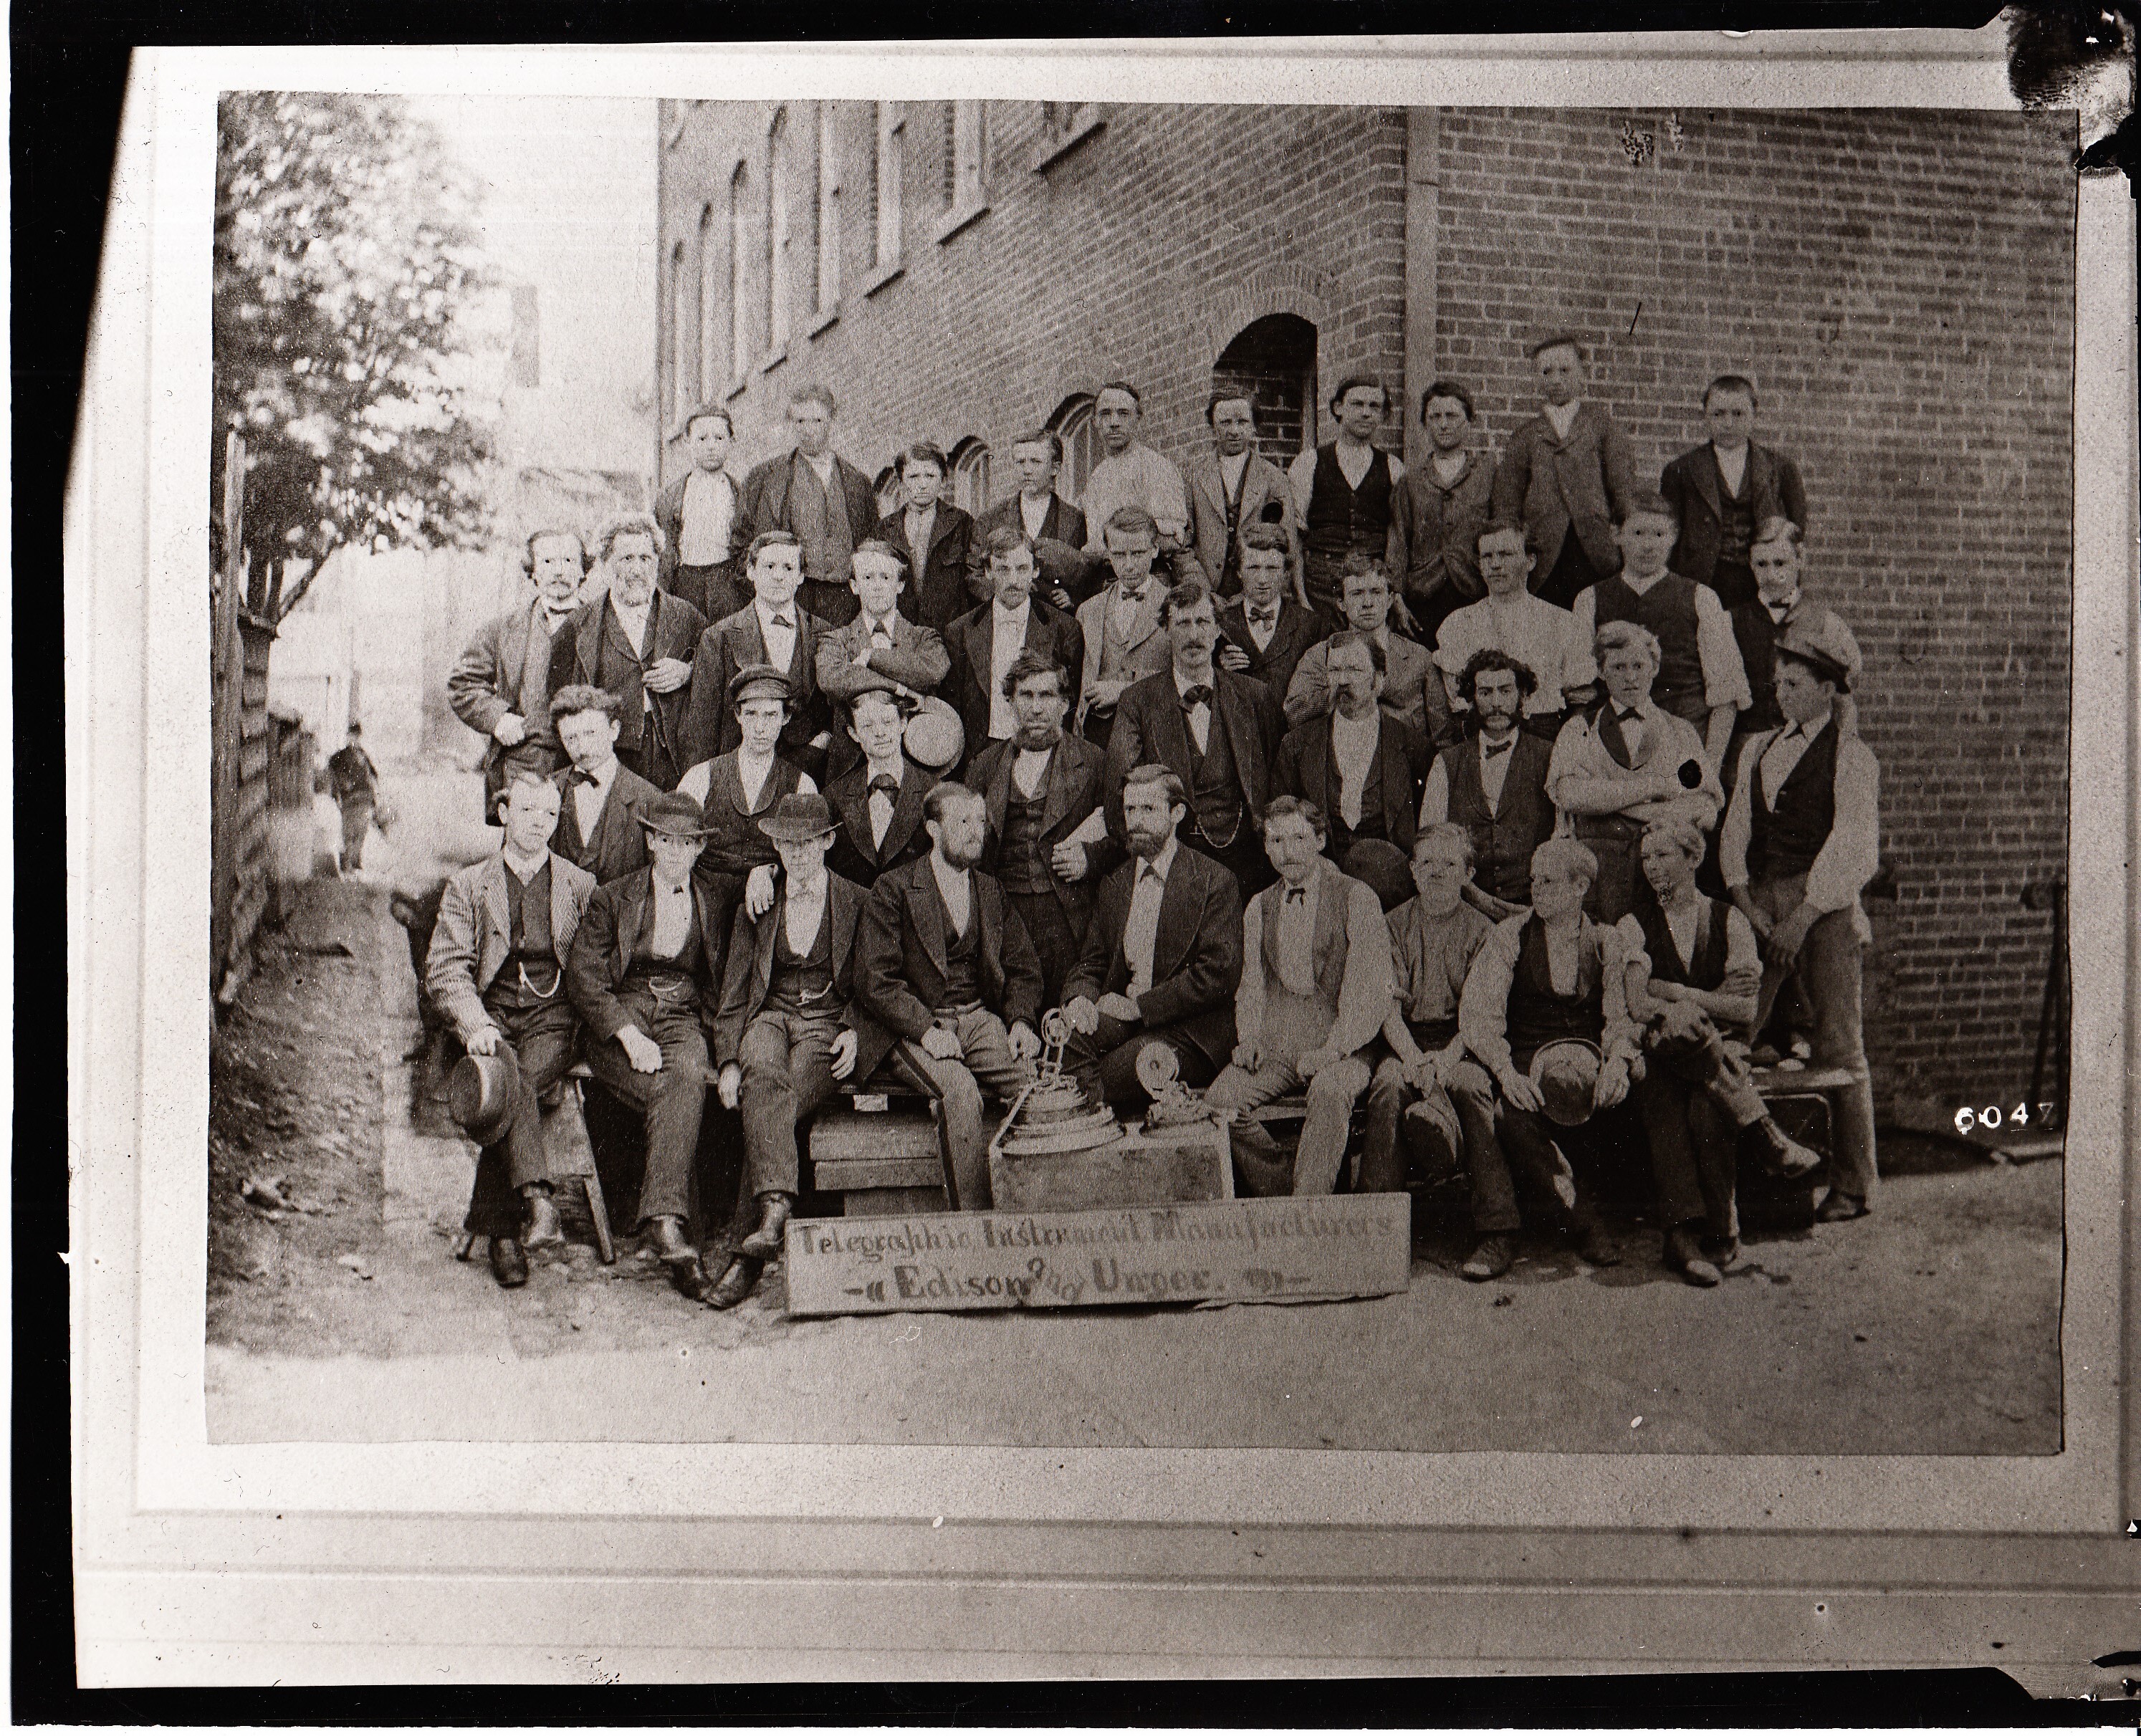 Edison and Unger employees, telegraphic instrument makers, photographed in Kirk's alley behind building at 10-12 Ward St.